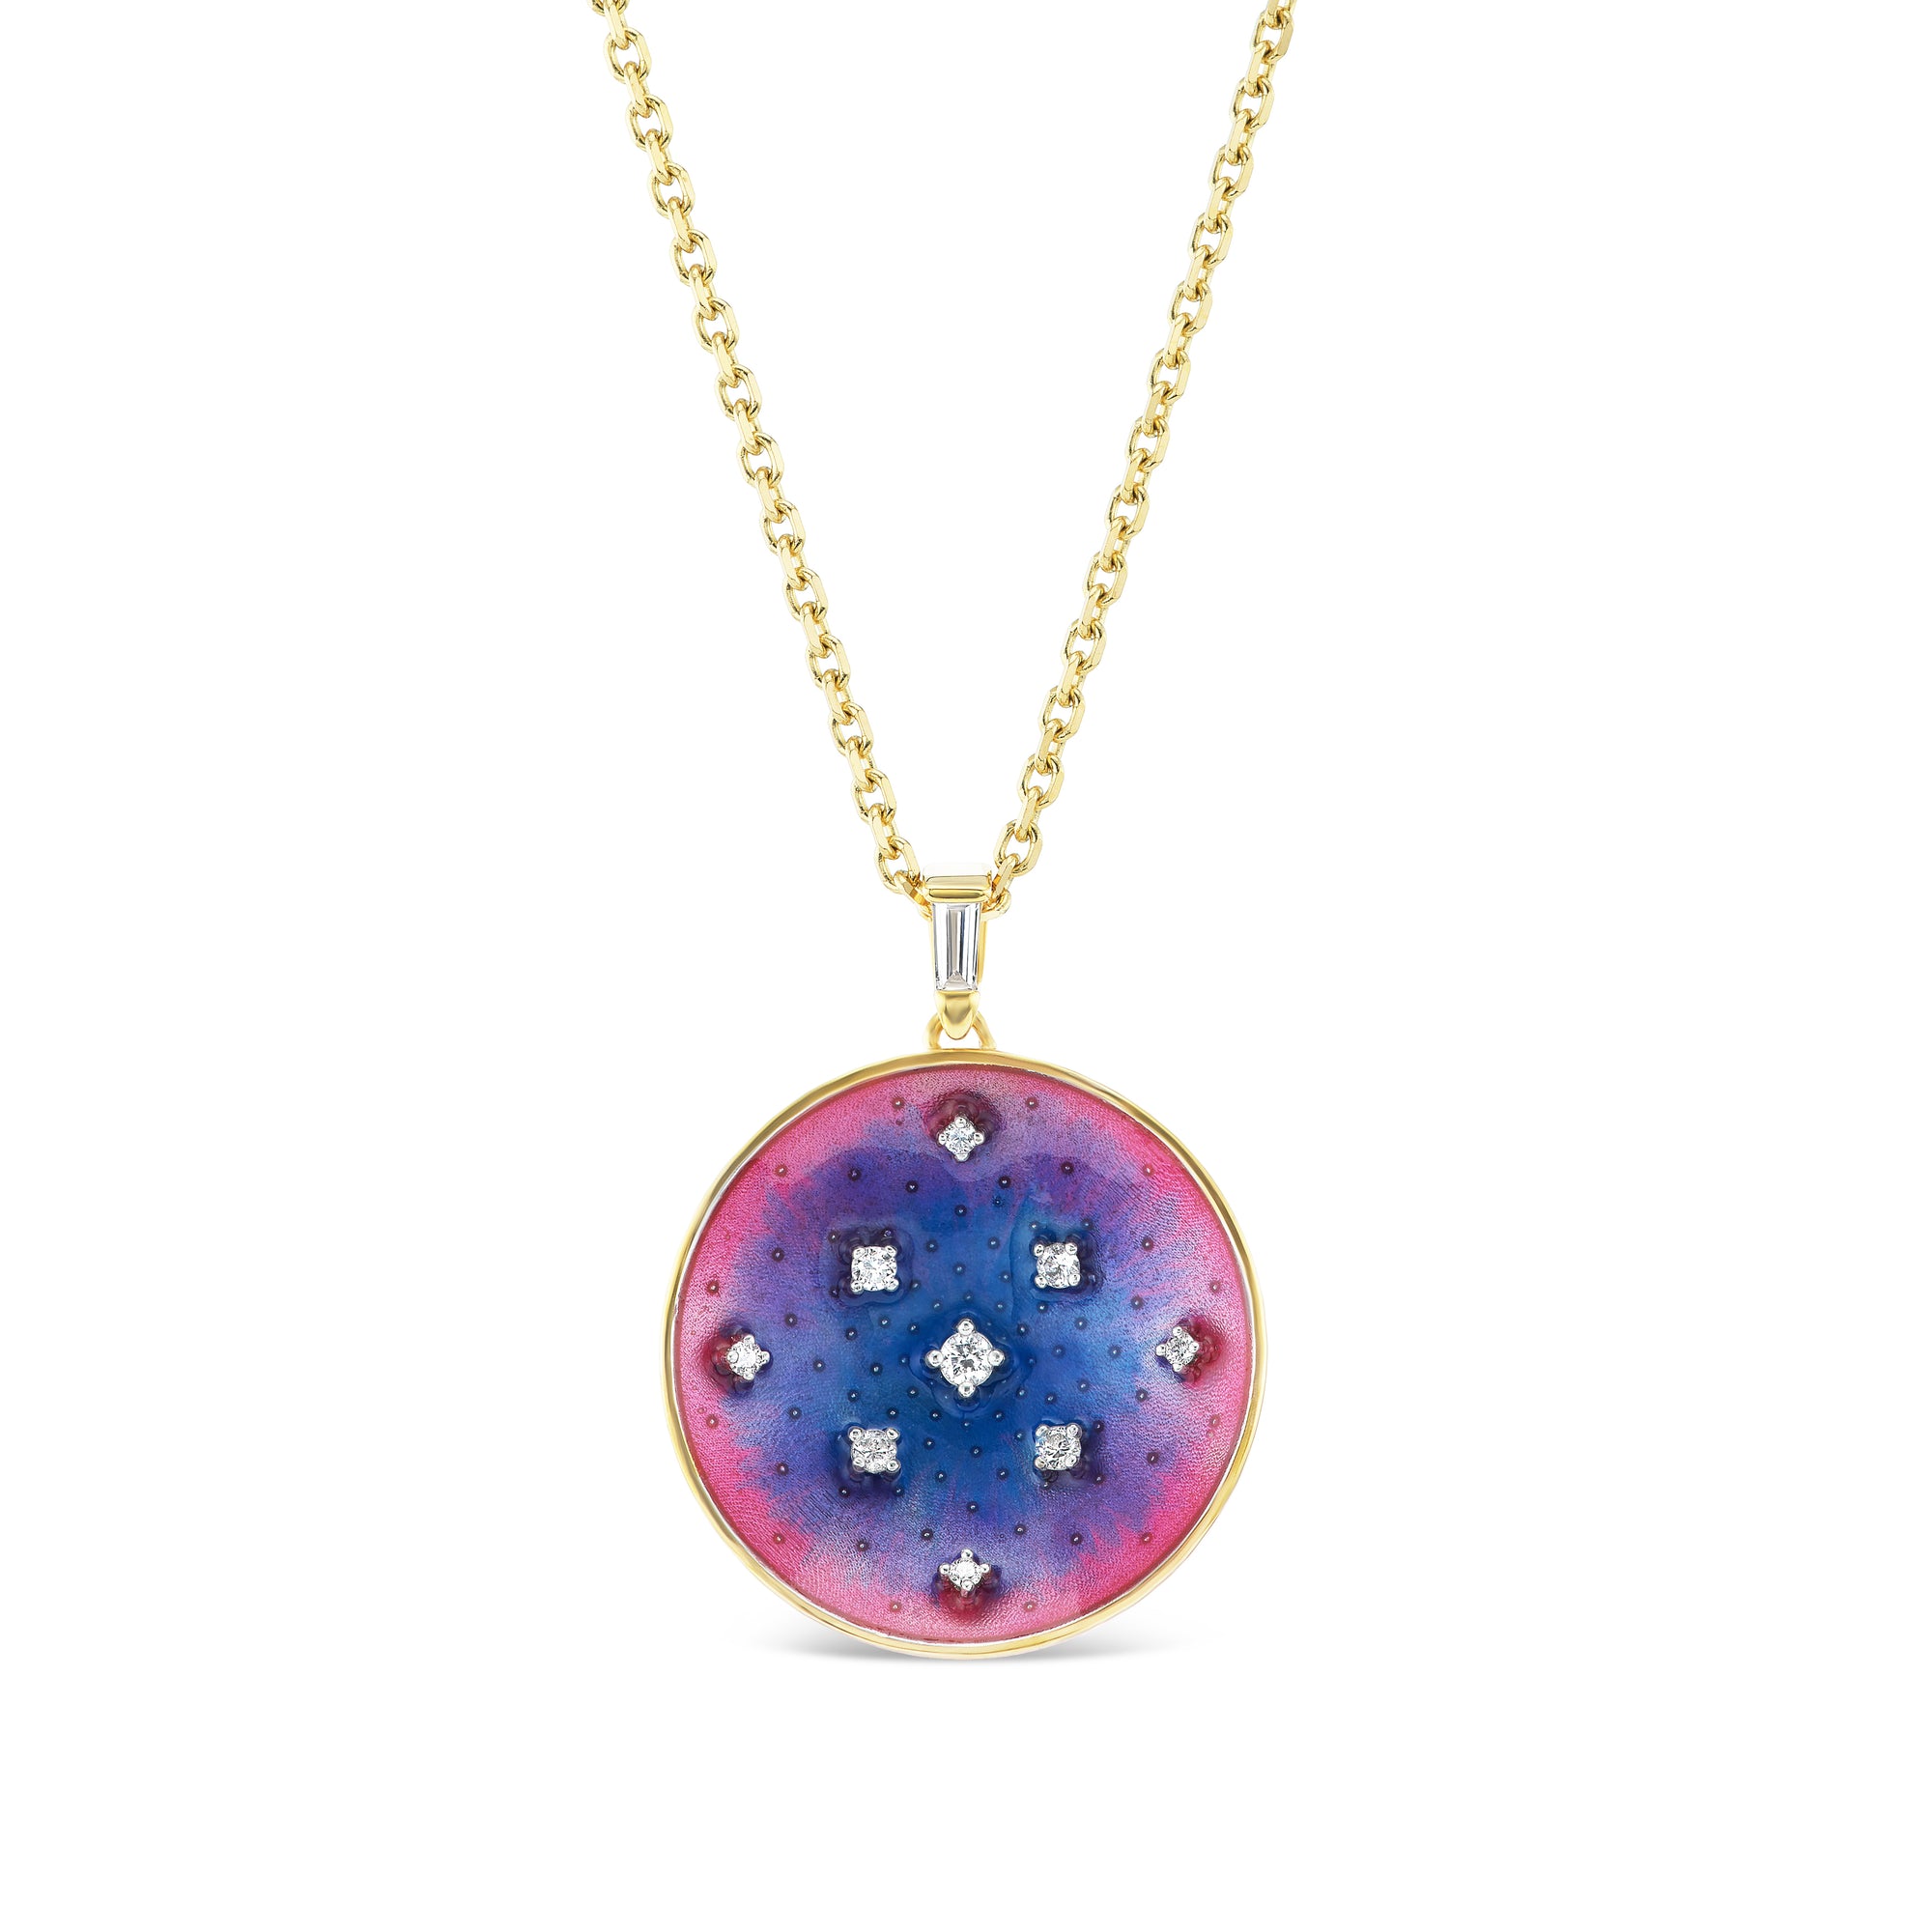 Luxe Cosmic Bloom Enamel Pendant Necklace by Meredith Young available at Talisman Collection Fine Jewelers in El Dorado Hills, CA and online. The painterly enamel work in this pendant adds a burst of vibrant color and serves as a backdrop for 0.2 cts of diamonds that resemble distant stars sparkling in the night sky...  Designed to stand out, this 18k gold pendant radiates good cosmic vibes. 